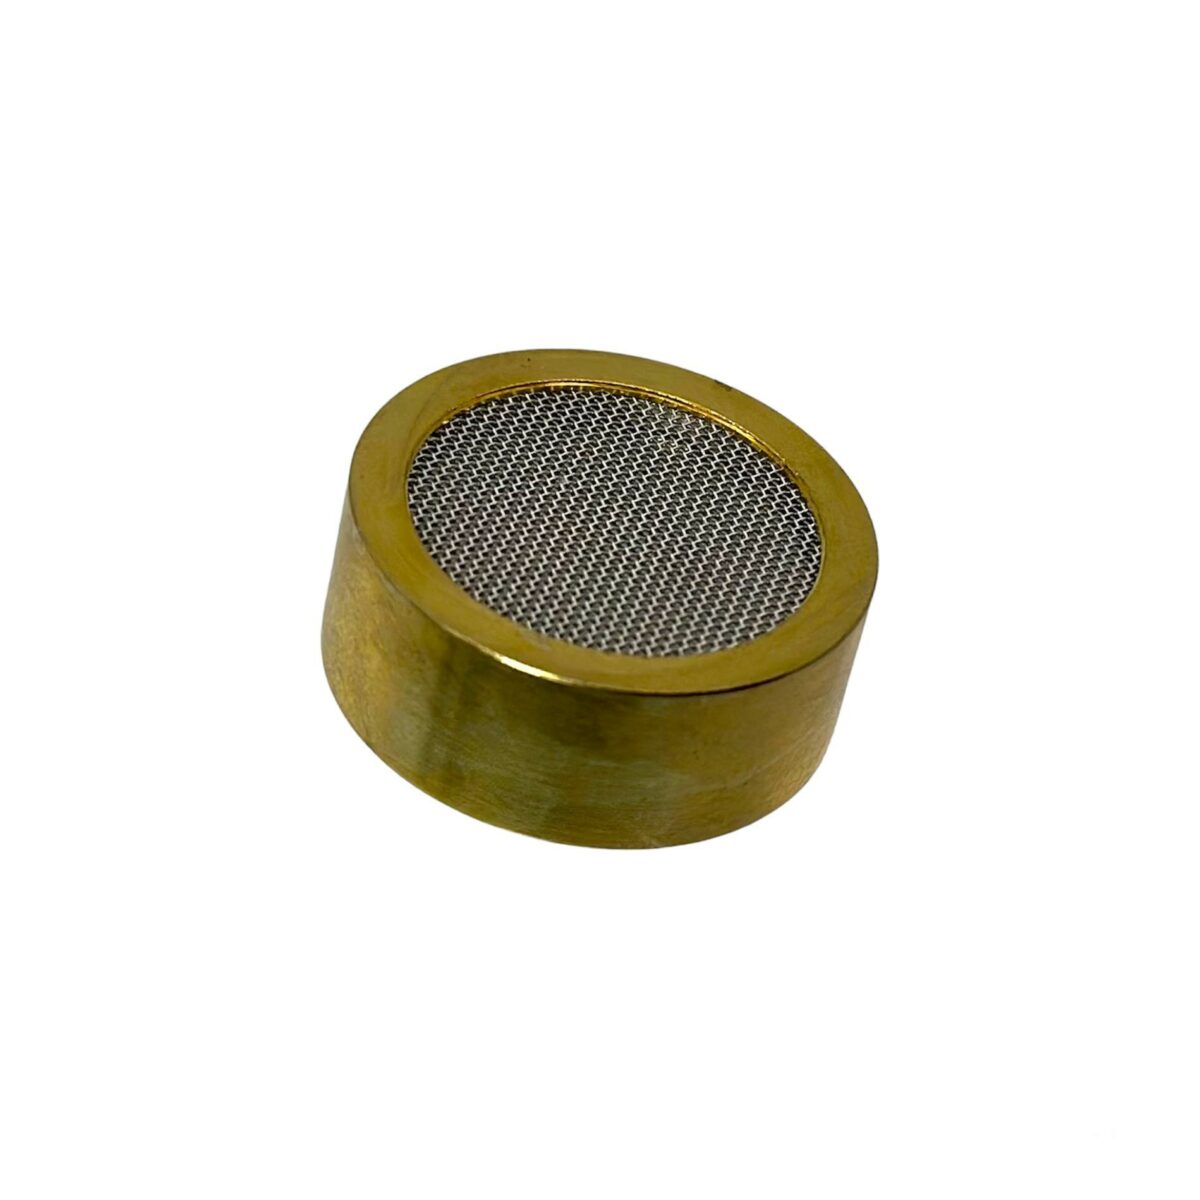 Photo of 25mm Large Diaphragm Condenser Microphone Cartridge 1 at Analog Classics